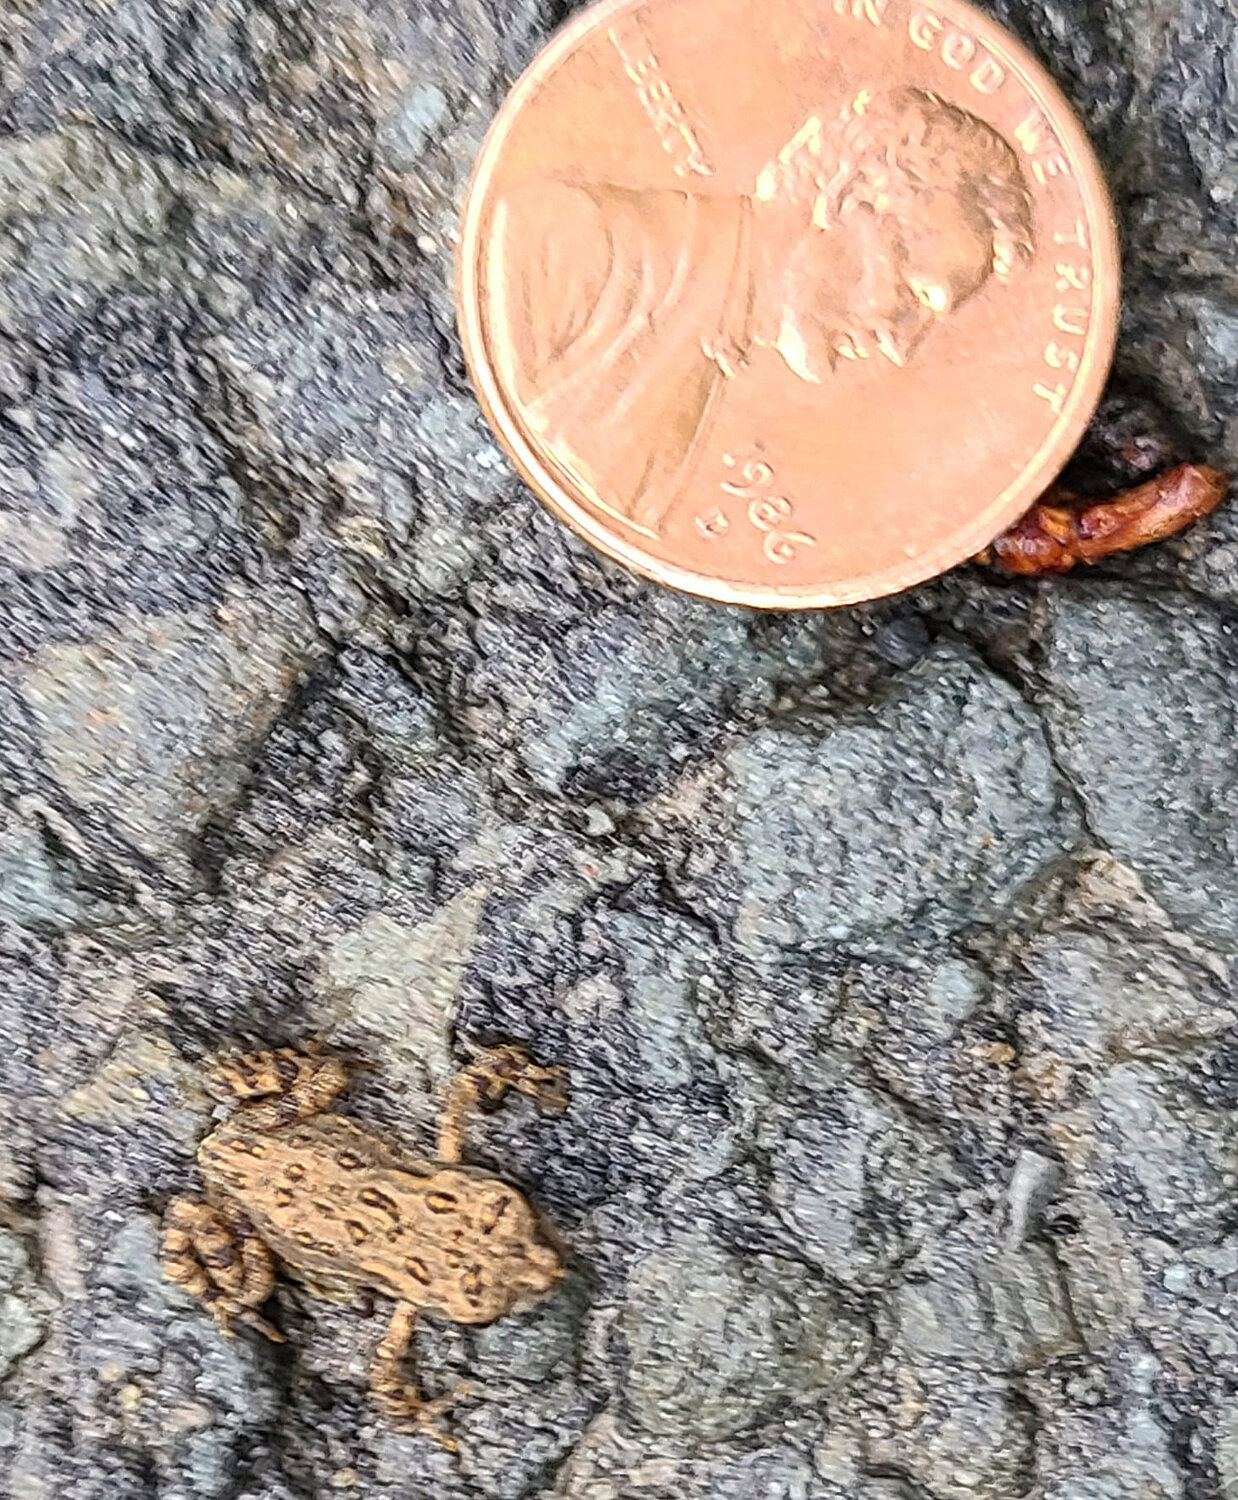 This is one of many toadlets seen in July of last year. A penny is in the frame for scale. The toadlets can sometimes be so numerous, especially near the ponds they emerge from, that it can be hard to avoid stepping on them. American toadlets disperse away from the water, seeking similar habitats as the adults. When it is time for their first breeding season in two to three years, they could trek up to a half-mile to the breeding pond from wherever they are.